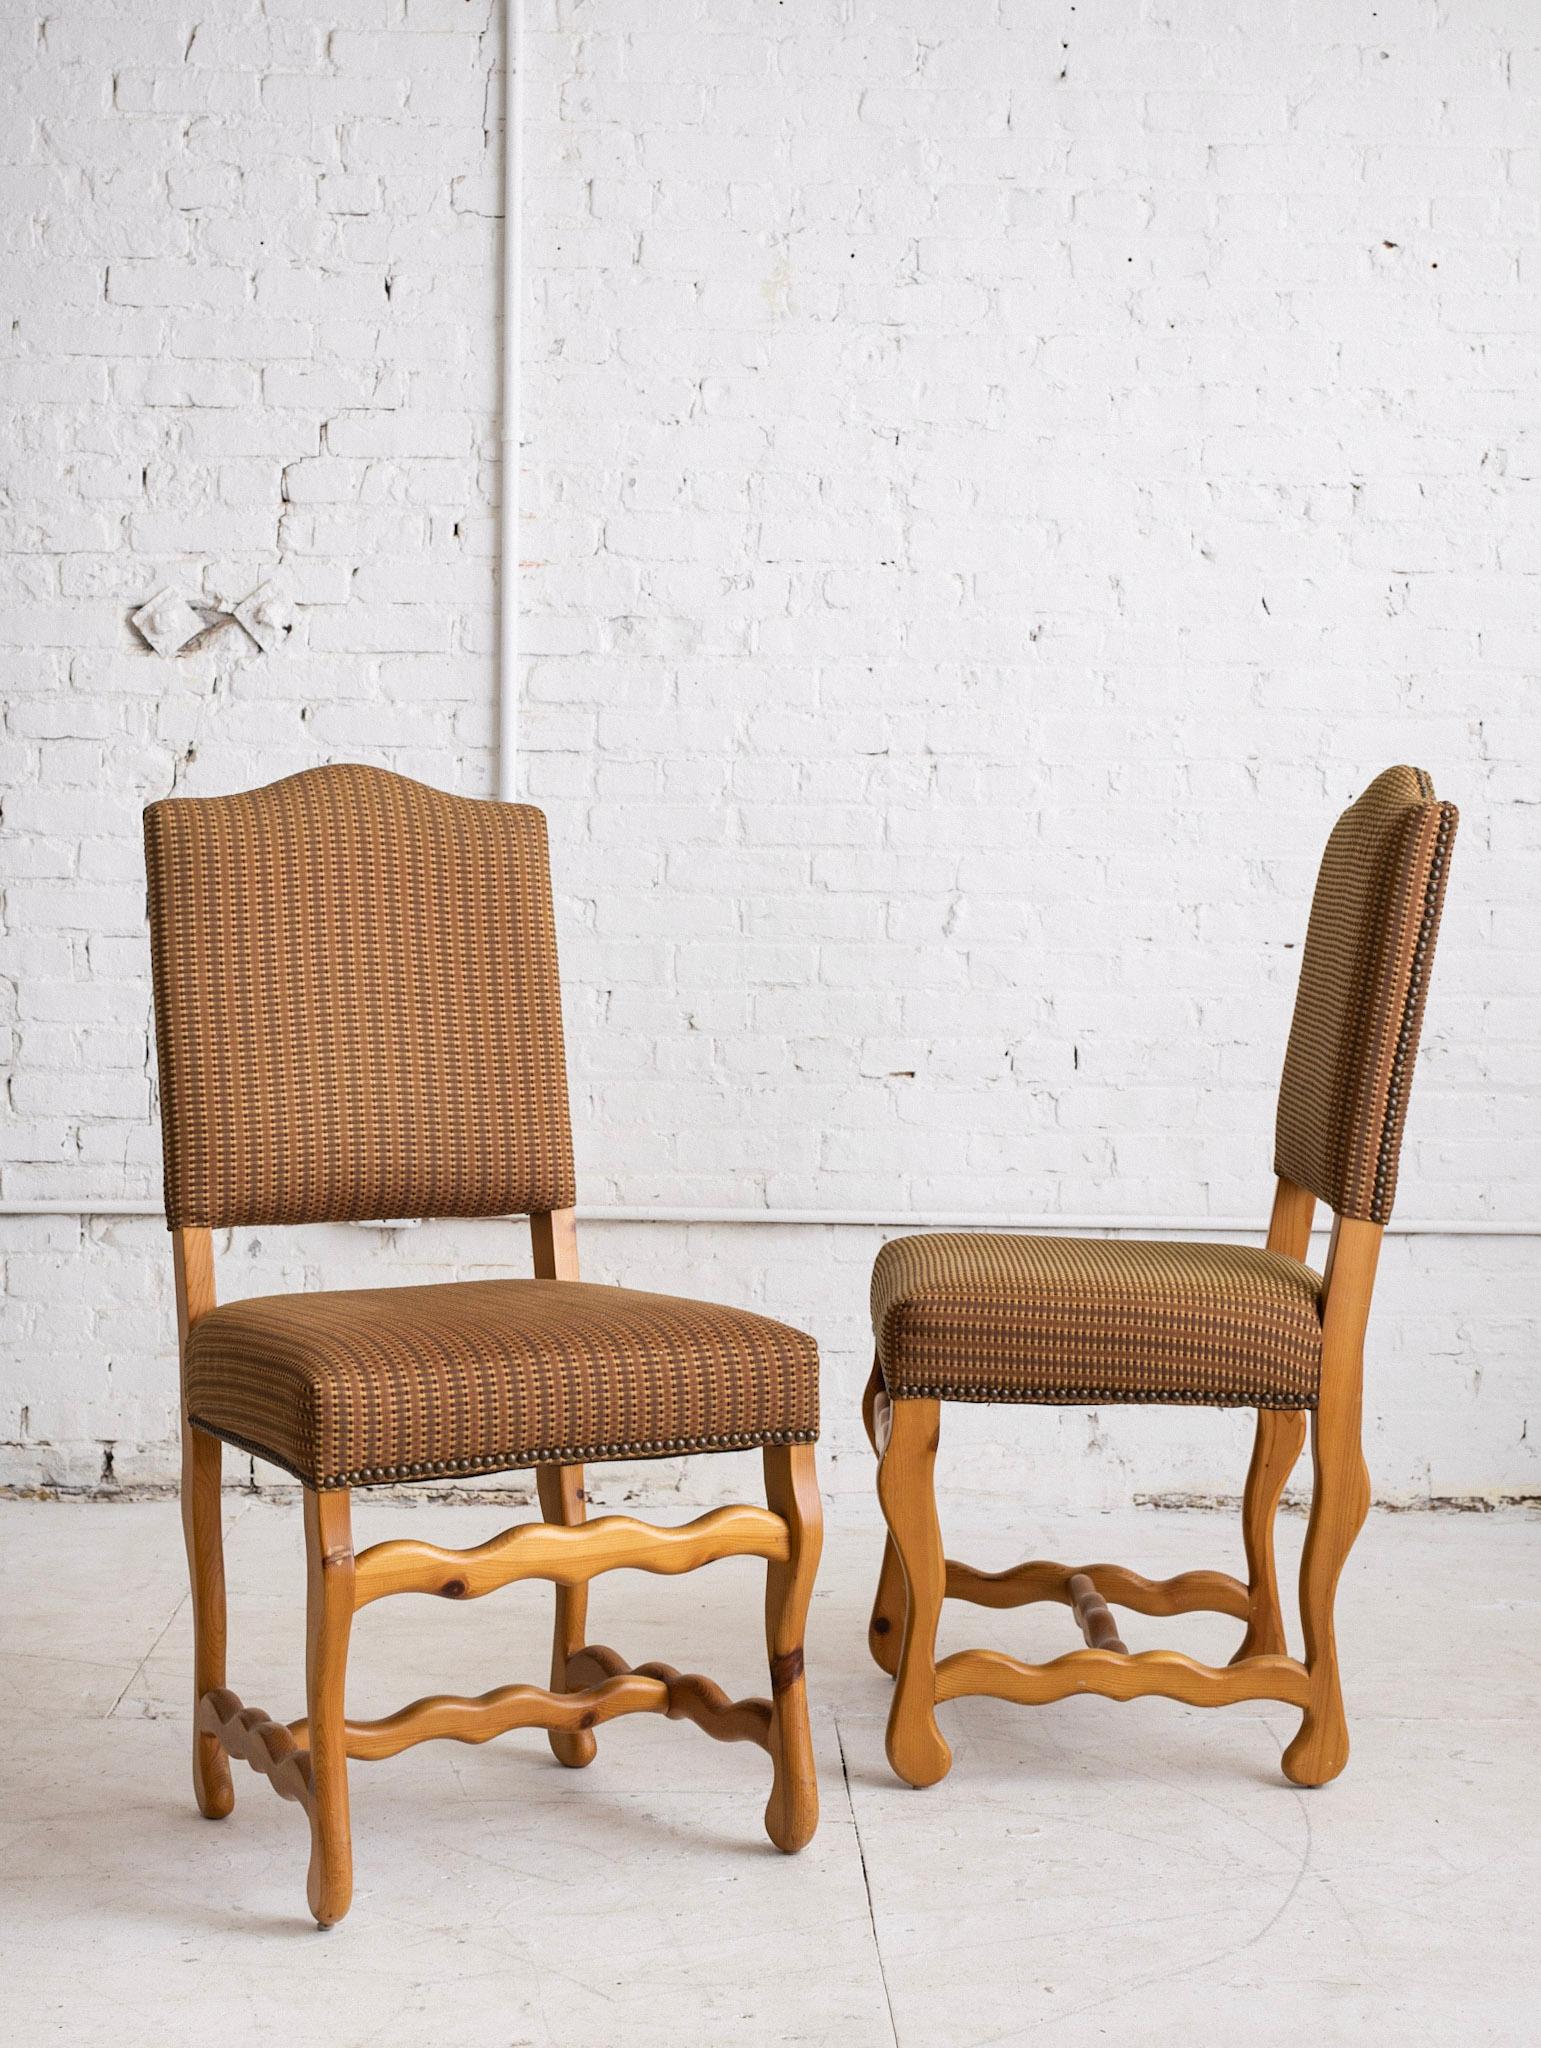 North American Post Modern 'Squiggle' Form Knotty Pine Dining Chairs - A Set of 4